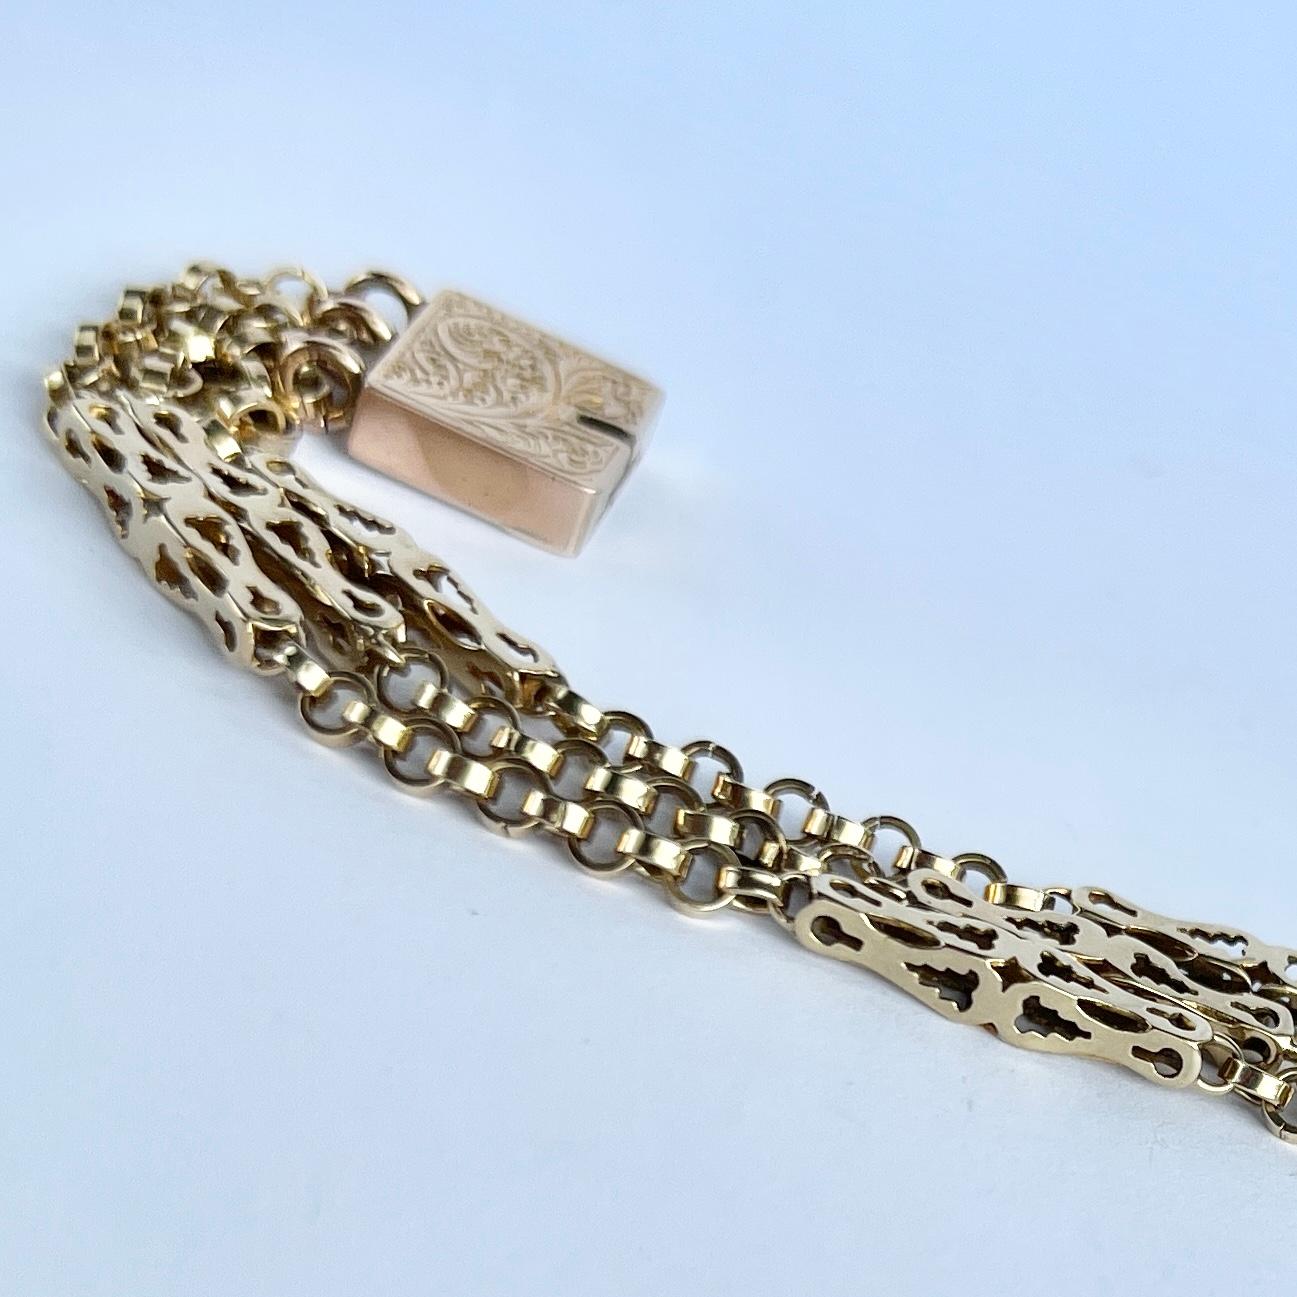 Edwardian 9 Carat Gold Chain Bracelet  In Good Condition For Sale In Chipping Campden, GB